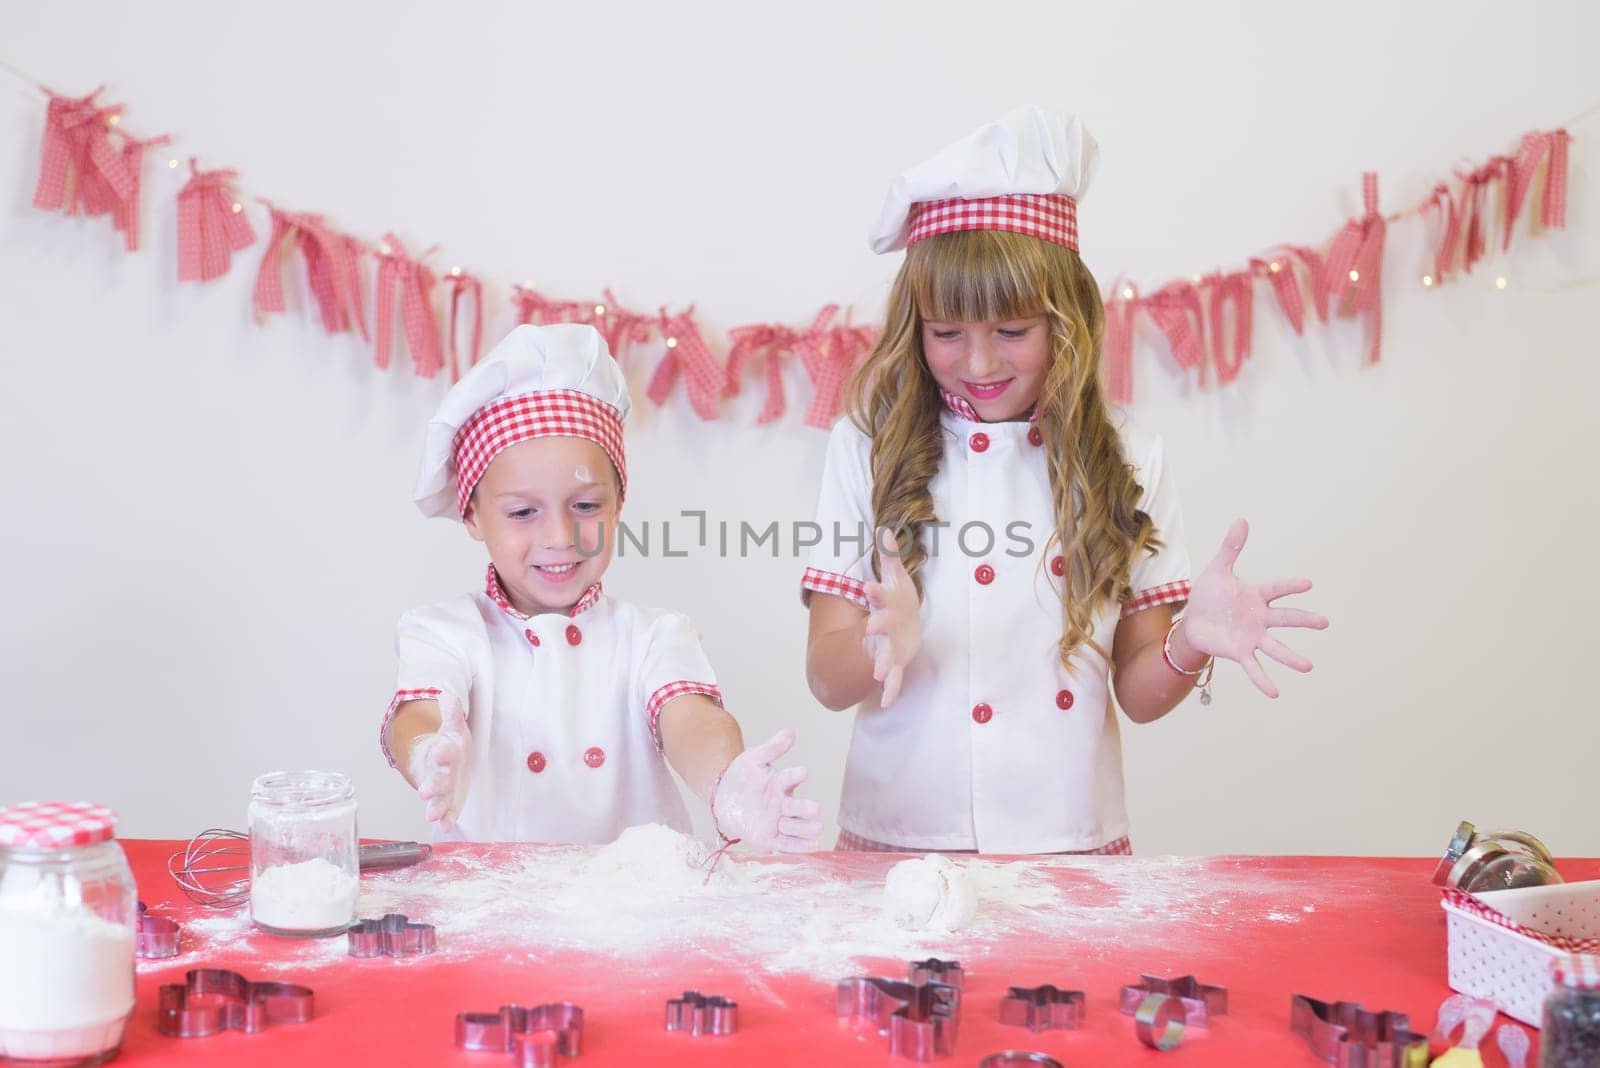 happy smiling children in apron and chef hat cooking cookies with flour, eggs, chocolate and water. Kitchen and family. Happy kids by jcdiazhidalgo